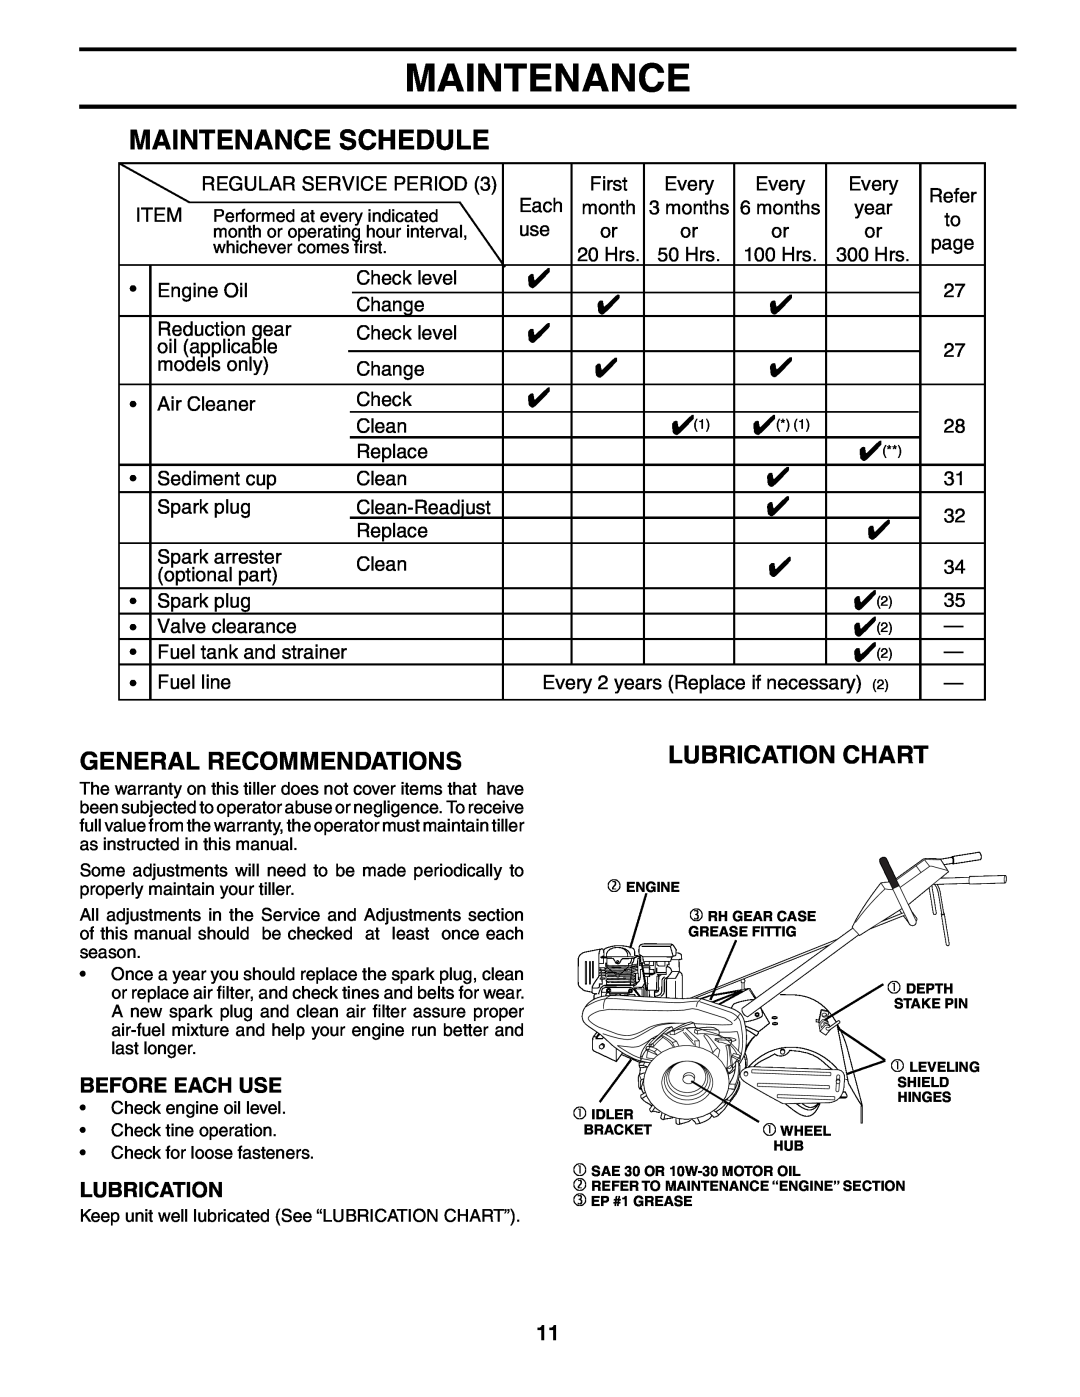 Husqvarna 500RTT owner manual General Recommendations, Lubrication Chart, Before Each Use, Maintenance Schedule 